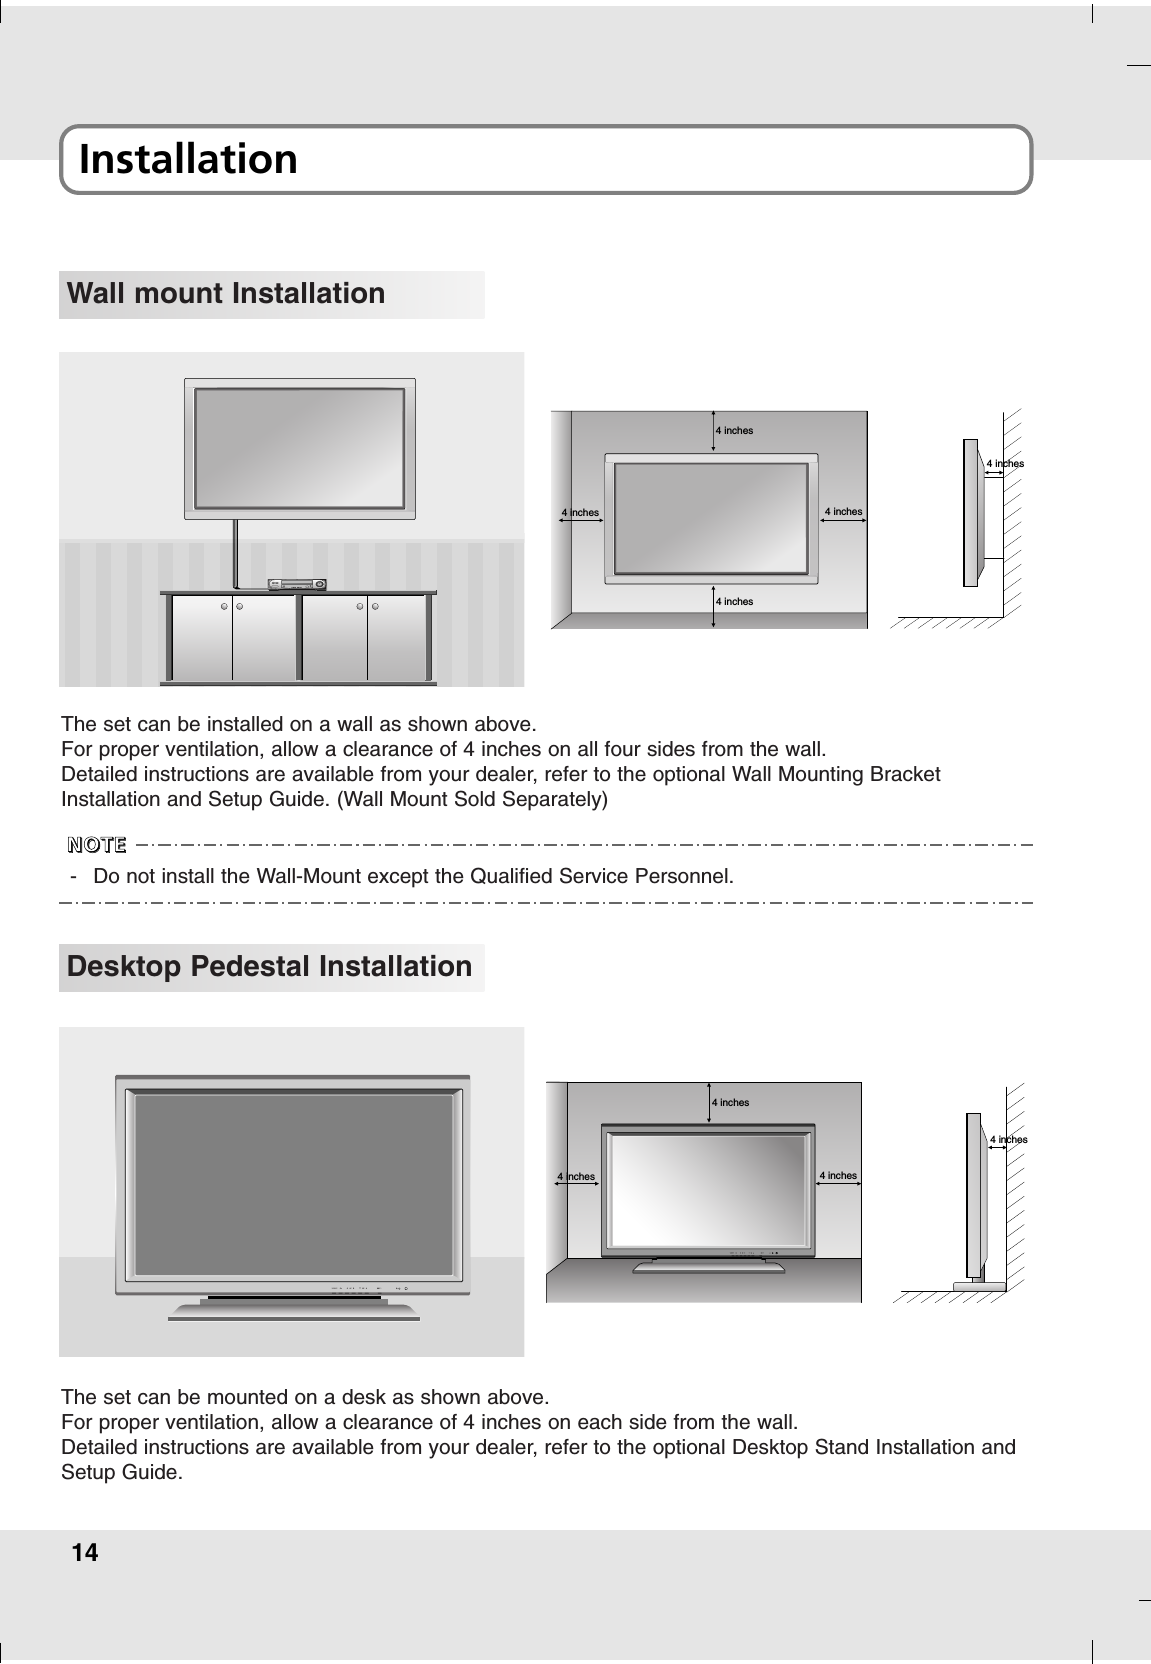 14Installation Wall mount Installation4 inches4 inches4 inches4 inches4 inchesThe set can be installed on a wall as shown above.For proper ventilation, allow a clearance of 4 inches on all four sides from the wall.Detailed instructions are available from your dealer, refer to the optional Wall Mounting BracketInstallation and Setup Guide. (Wall Mount Sold Separately)Desktop Pedestal Installation4 inches4 inches4 inches4 inchesThe set can be mounted on a desk as shown above.For proper ventilation, allow a clearance of 4 inches on each side from the wall.Detailed instructions are available from your dealer, refer to the optional Desktop Stand Installation andSetup Guide.-Do not install the Wall-Mount except the Qualified Service Personnel. NNNNOOOOTTTTEEEE